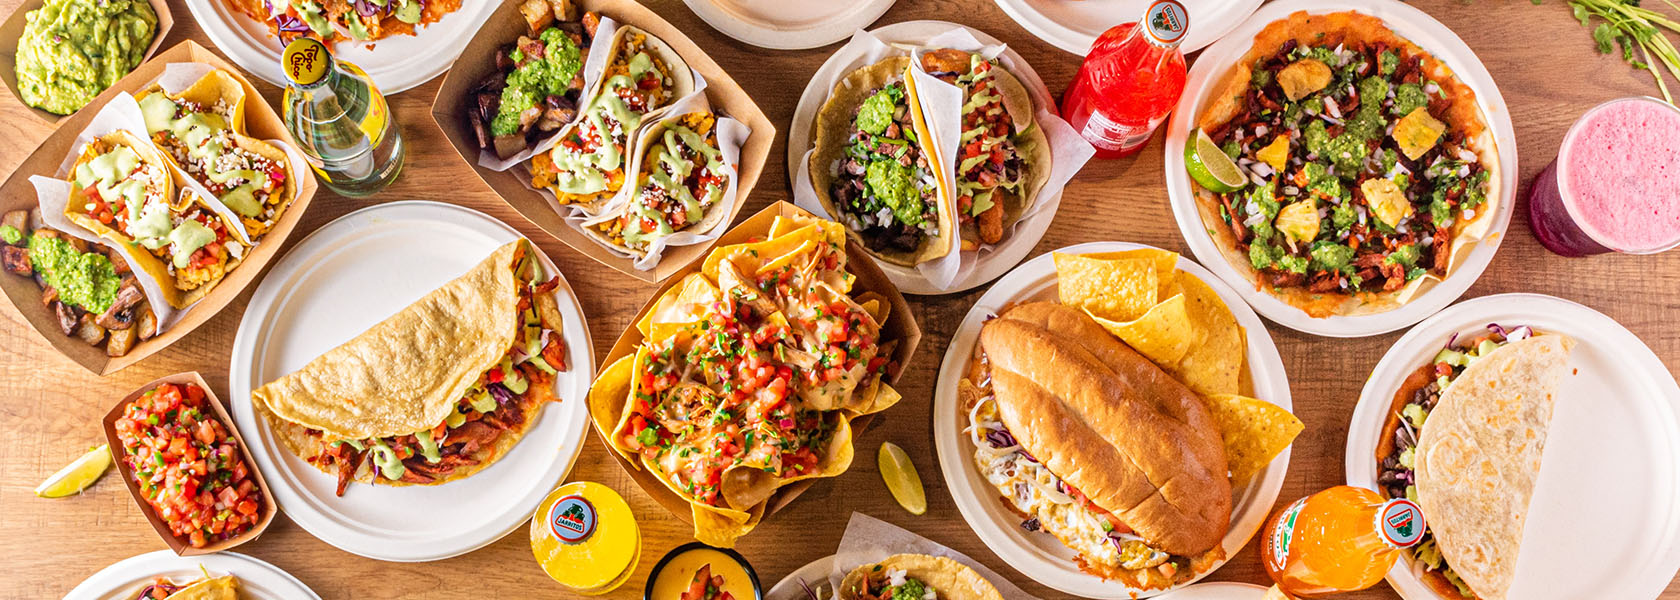 Bird's eye view of array of dishes served at Tacos Rudos